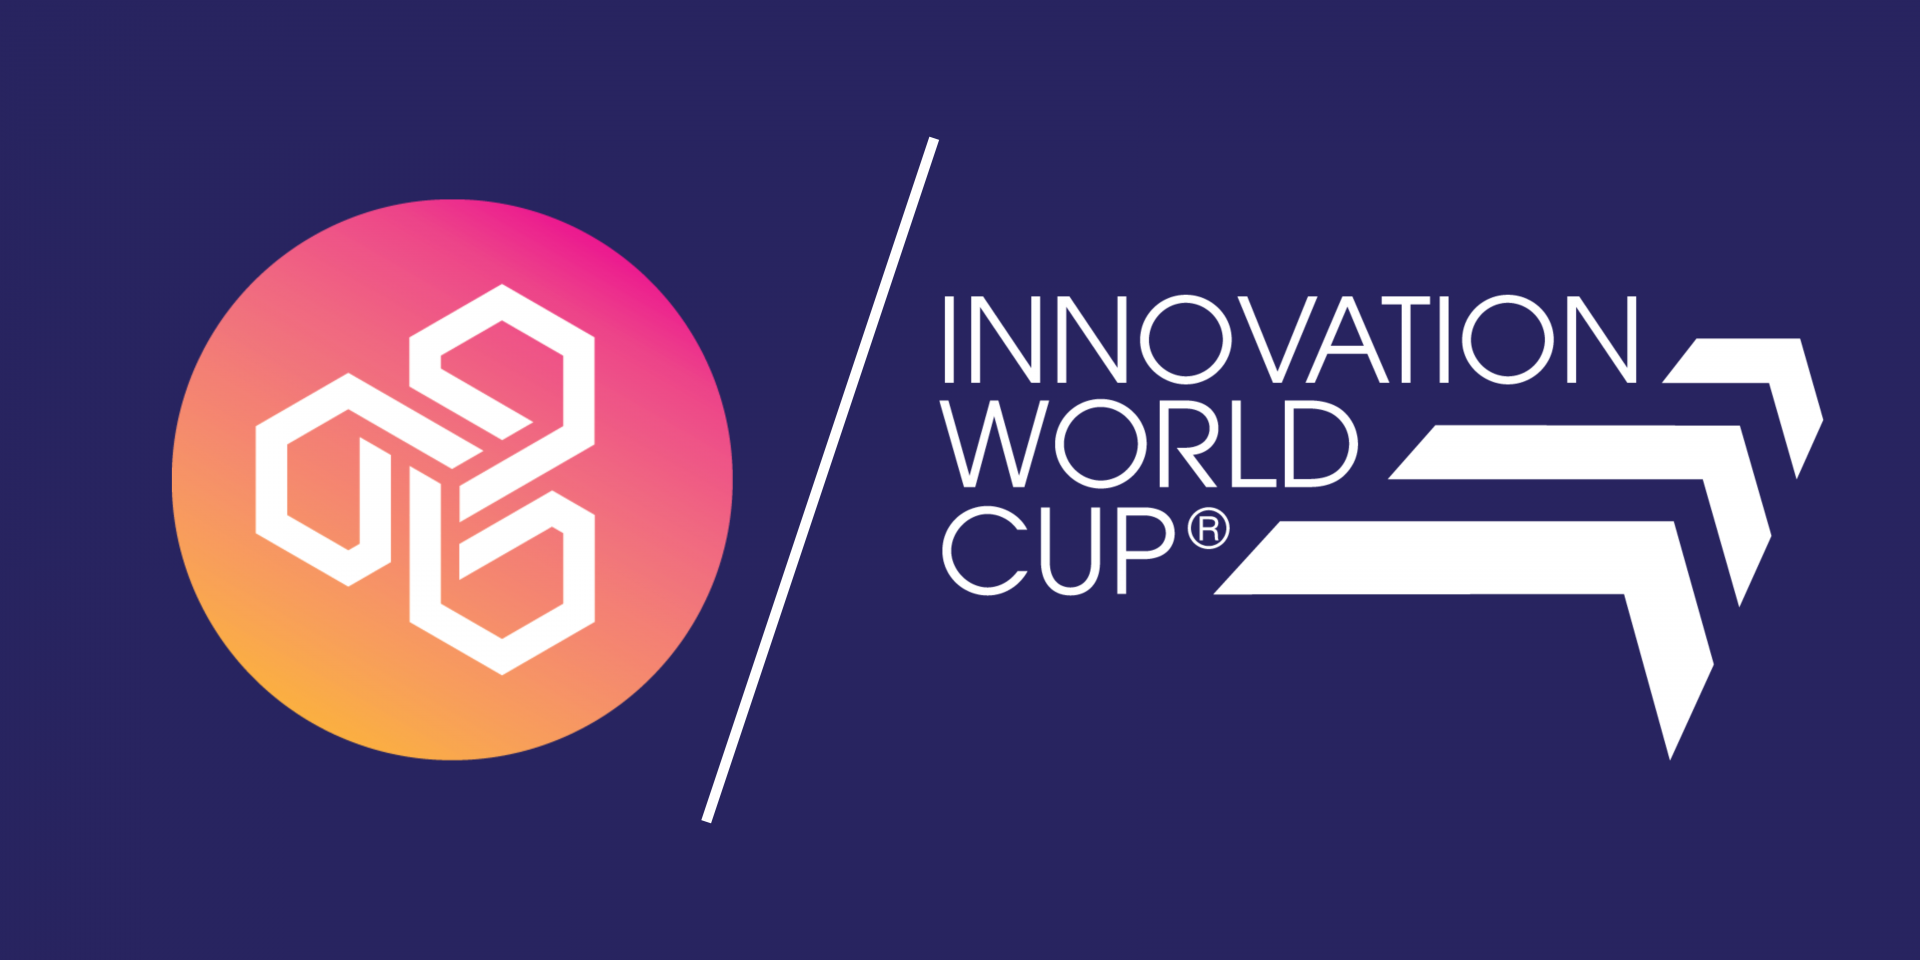 HVL Partners with Navispace and Welcomes Olivia Blanchard as an Innovation World Cup Ambassador